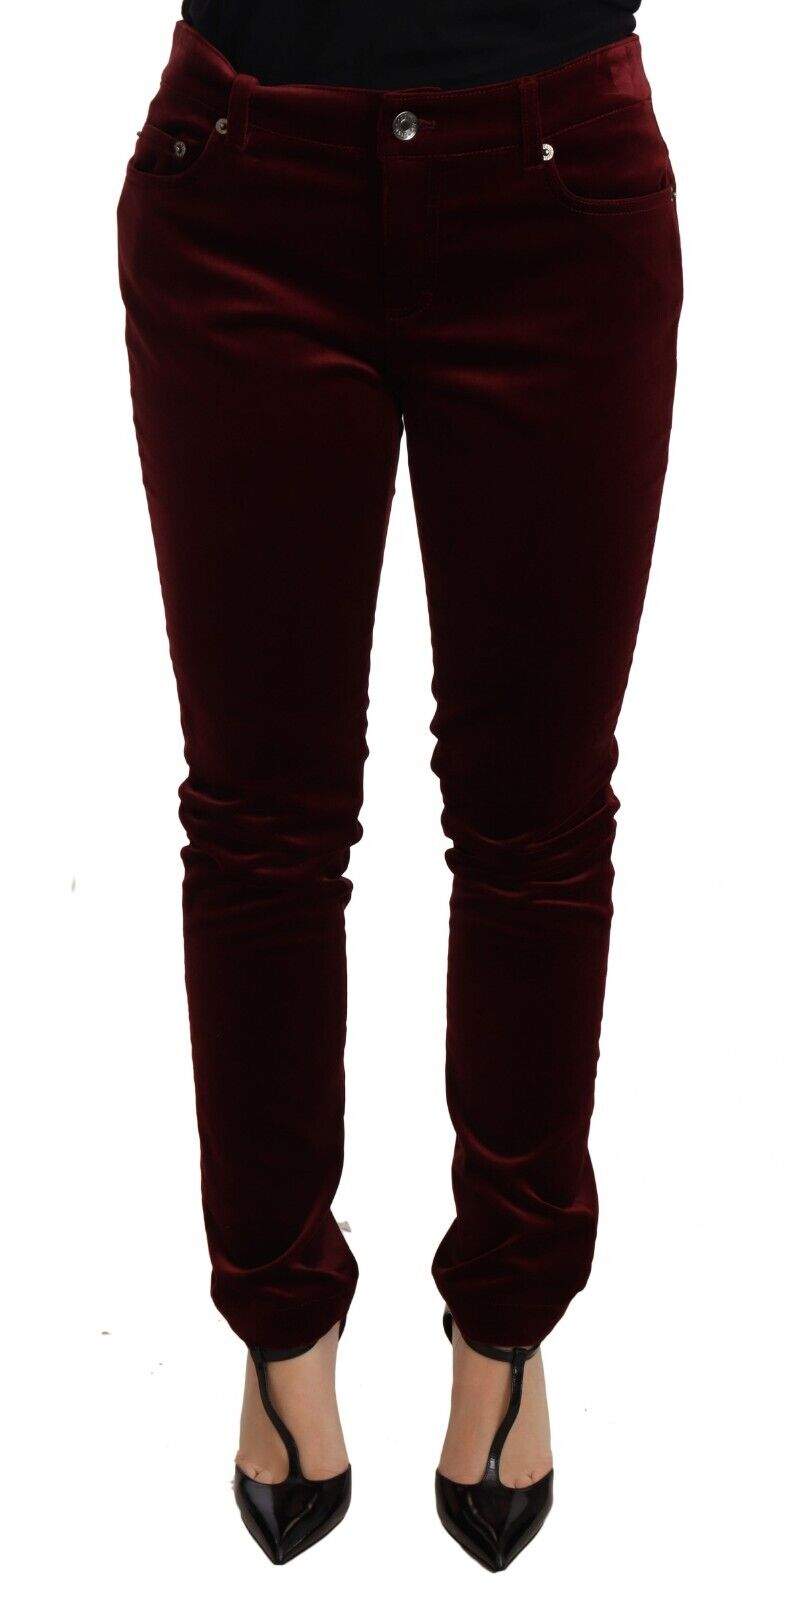 Dolce & Gabbana Red Velvet Skinny Trouser Cotton Stretch Pants Dolce & Gabbana, feed-1, IT40|S, Jeans & Pants - Women - Clothing, Red at SEYMAYKA